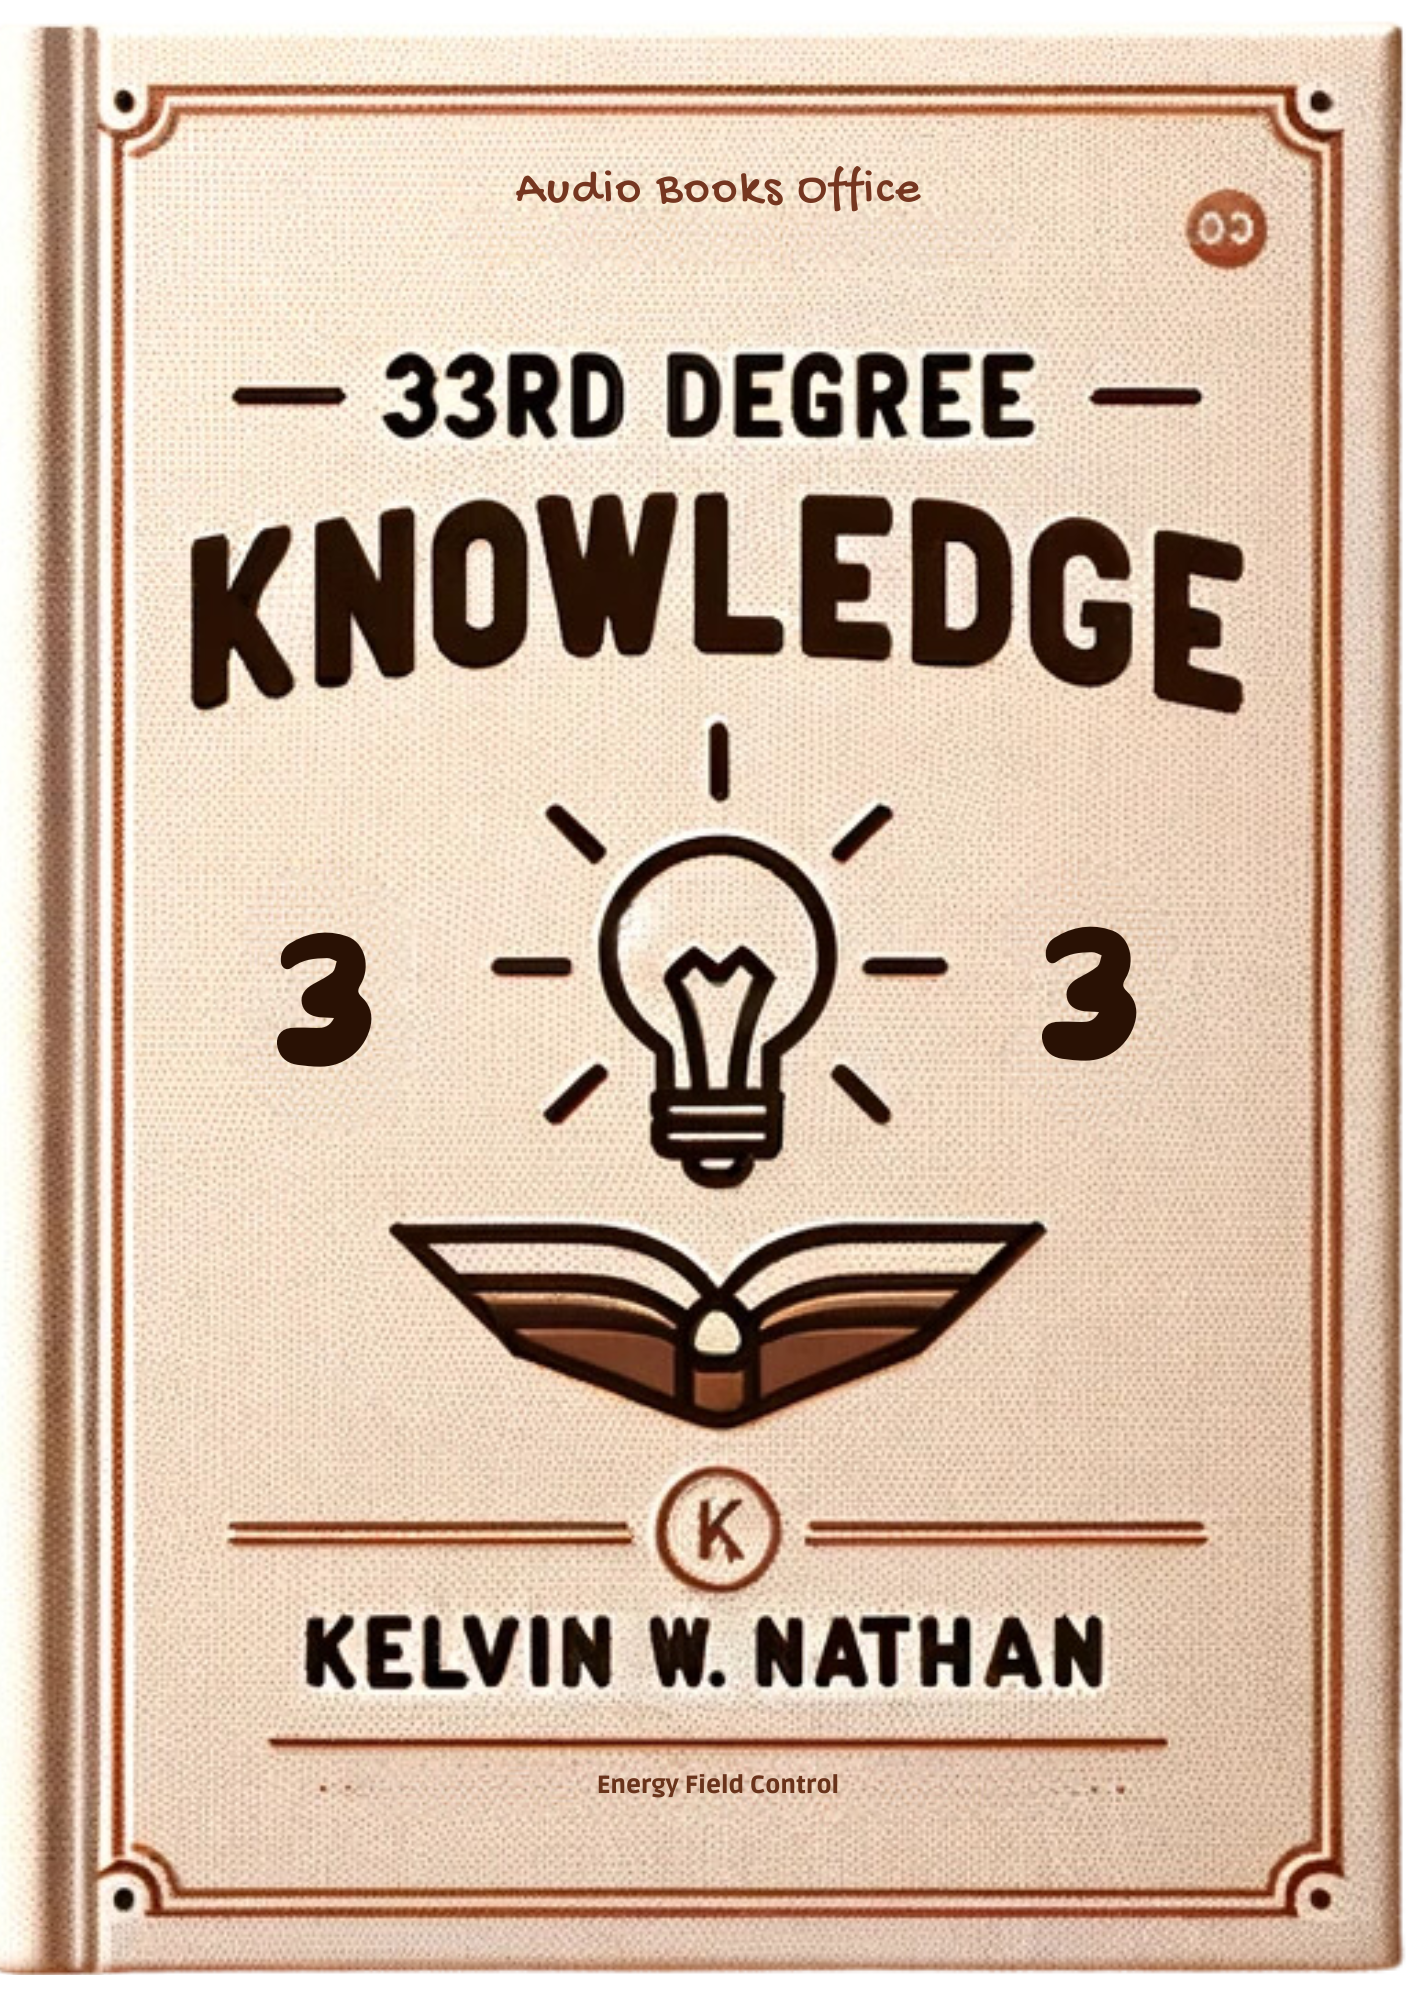 33rd Degree Knowledge: How to Mentally Control The Energy Field